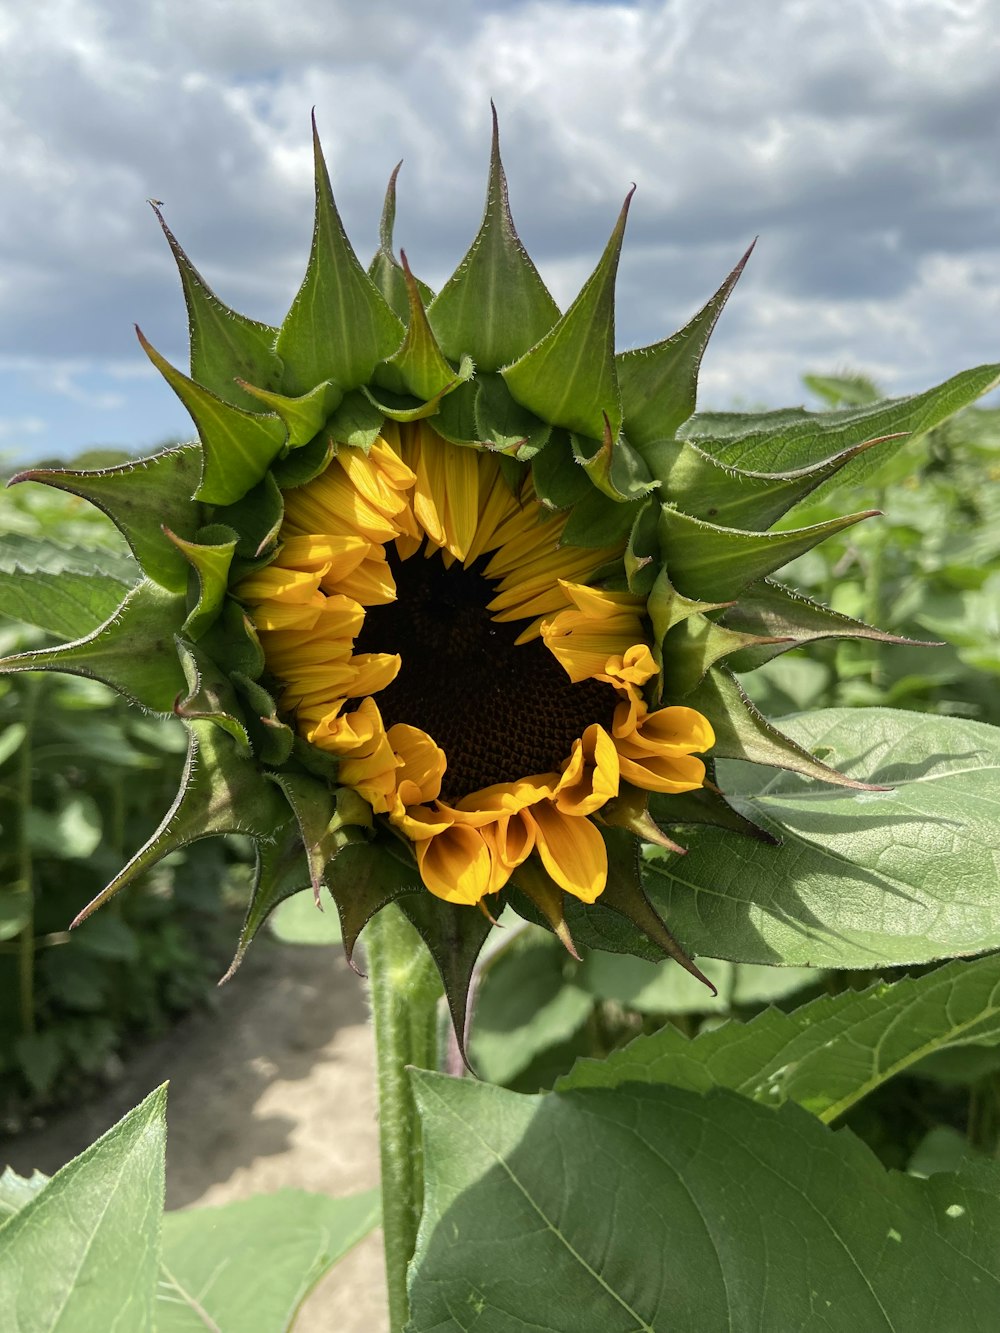 a large sunflower is blooming in a field